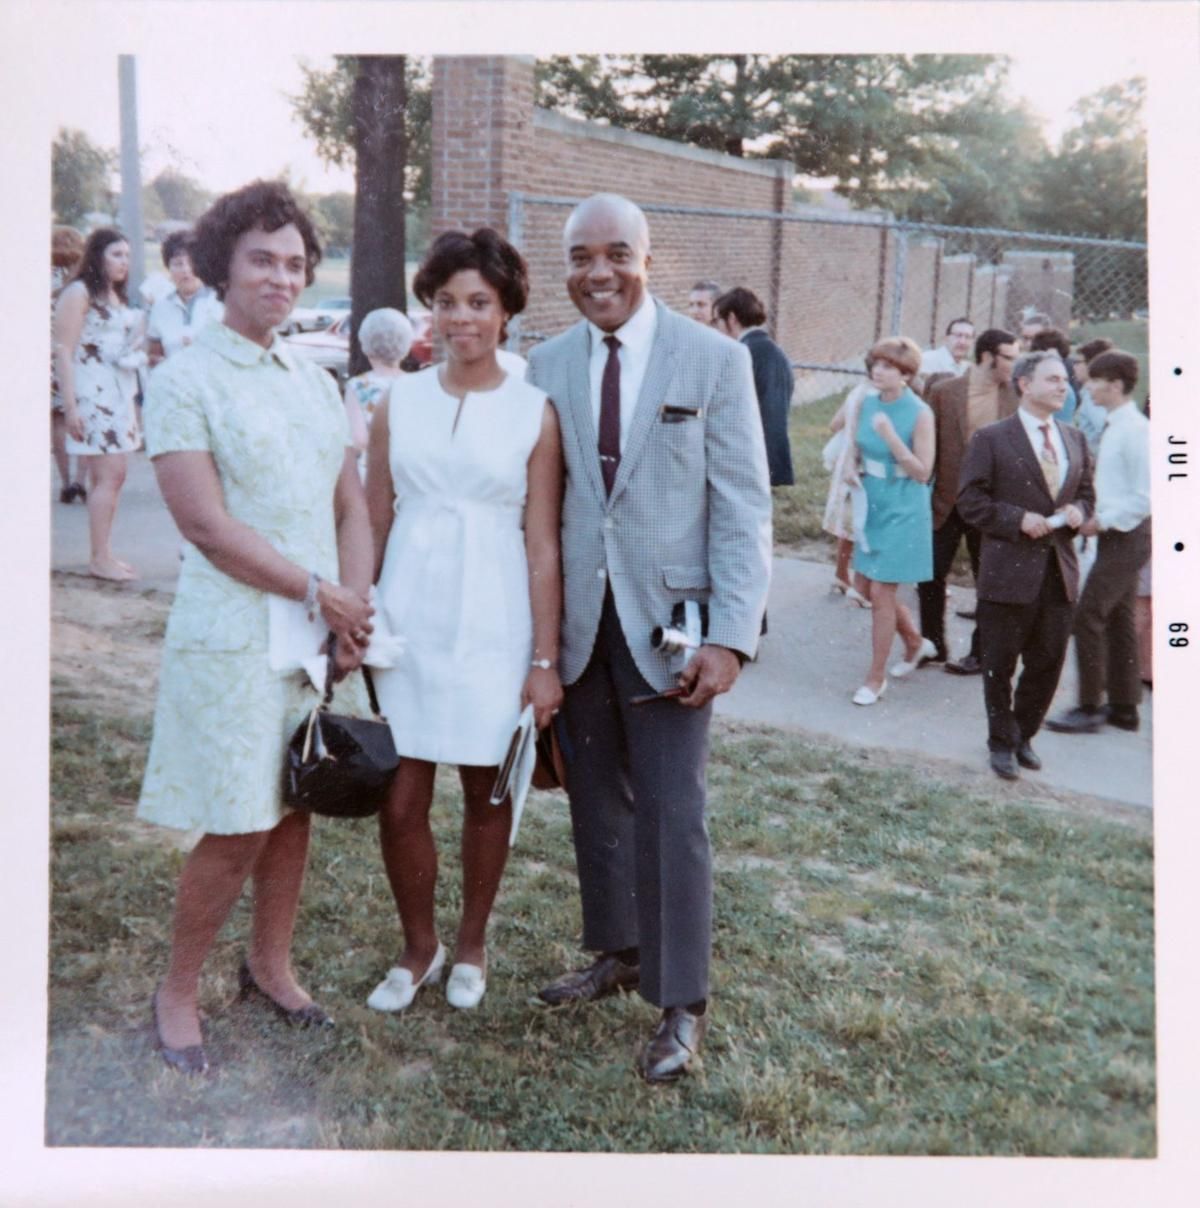 Judy Gladney, center, in a photograph with her parents, Clarice, left, and Dr. John Gladney at her University City High School graduation in 1969. Image courtesy of Judy Gladney. United States, 1969.